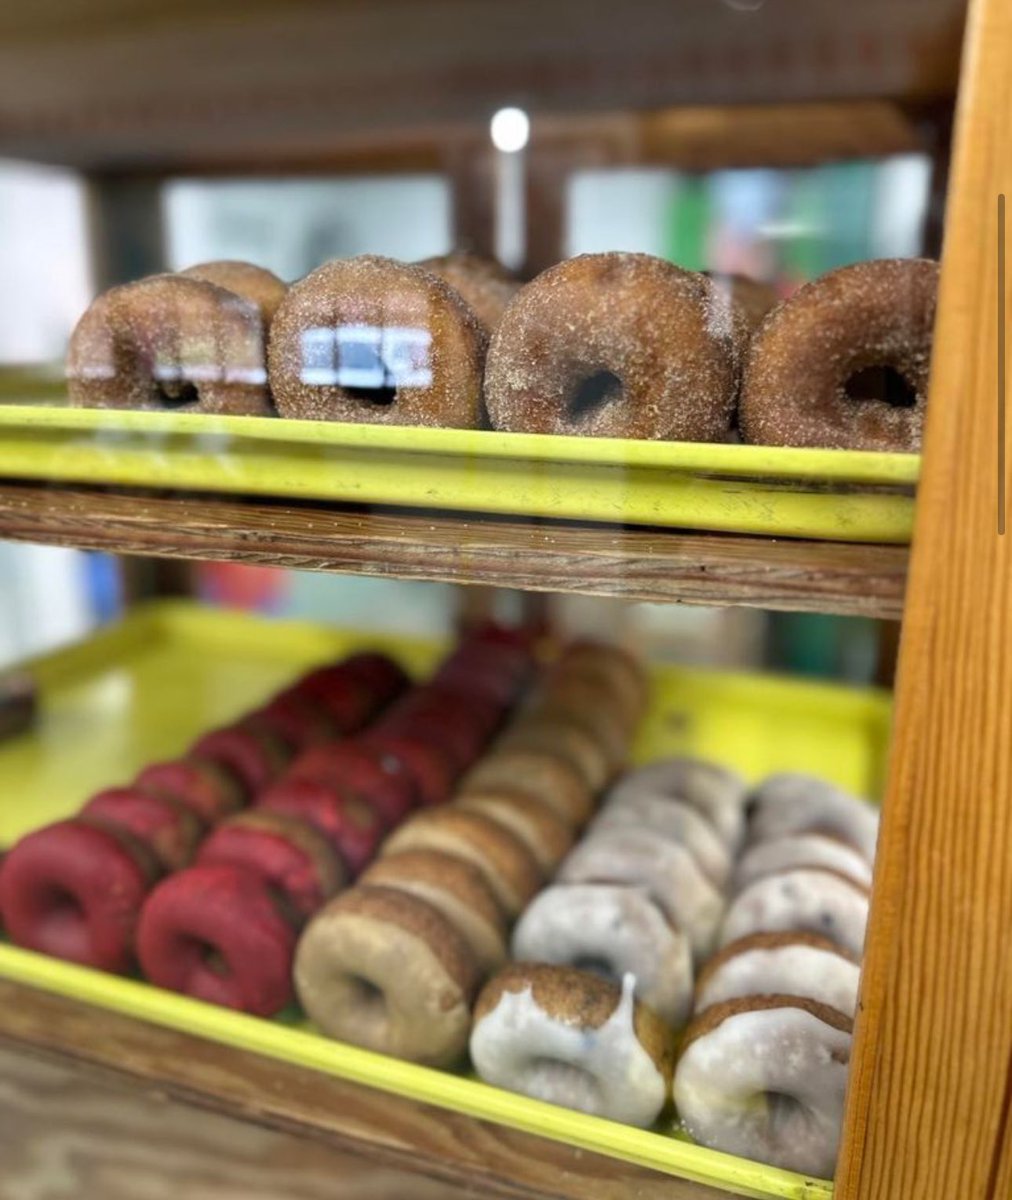 Today is the perfect day to get away from all the busyness of the season and to sneak in a quiet moment - just you and a delicious donut. 😉🍩🥰 Open daily through New Years Eve 9-5:30 PM. #SweetMoments #MichiganCiderMills #OaklandCounty #Donuts #Peaceful #HappyPlace